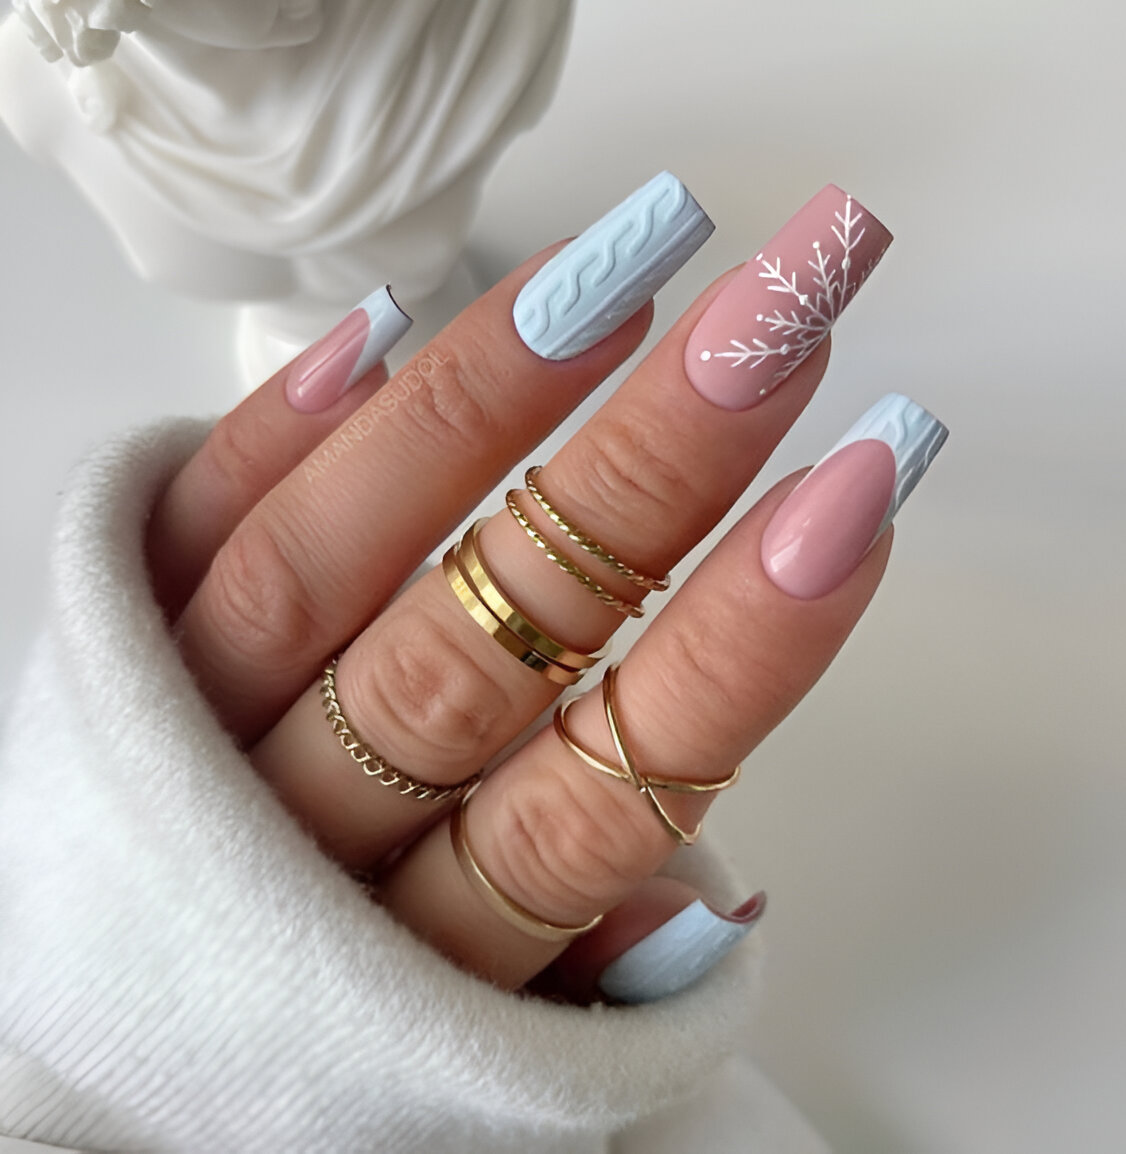 Pastel Blue Nails And Snow